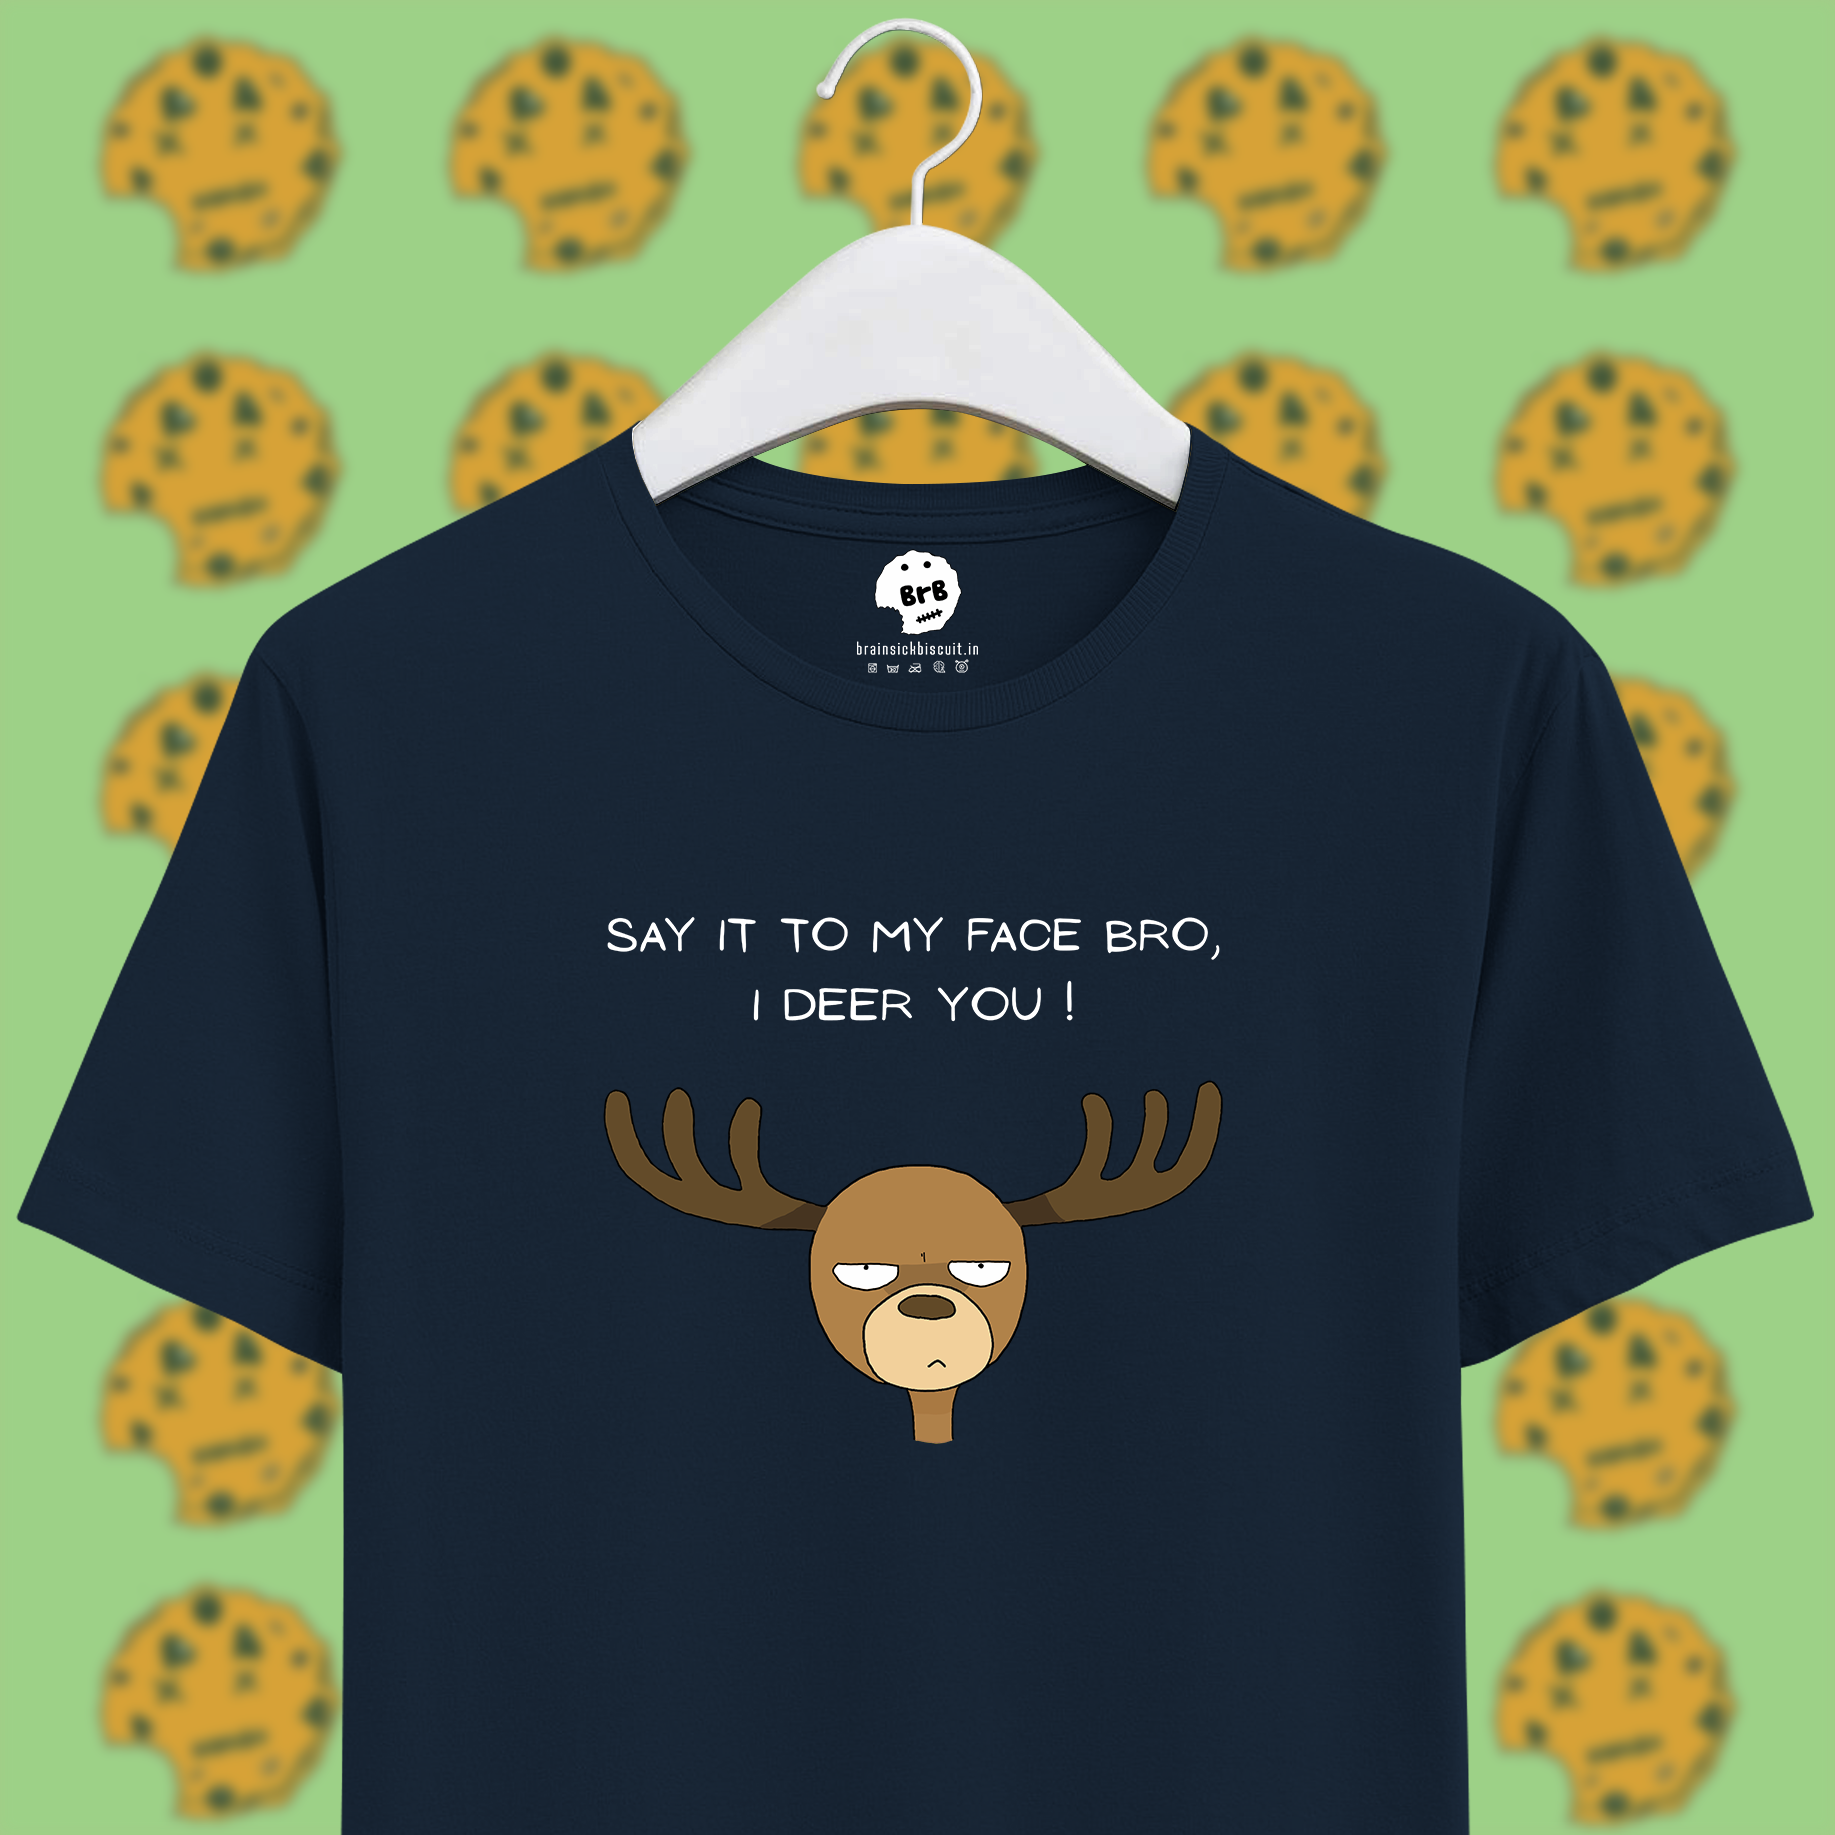 deer pun with say it to my face bro, i deer you text on unisex navy blue half sleeves t-shirt.